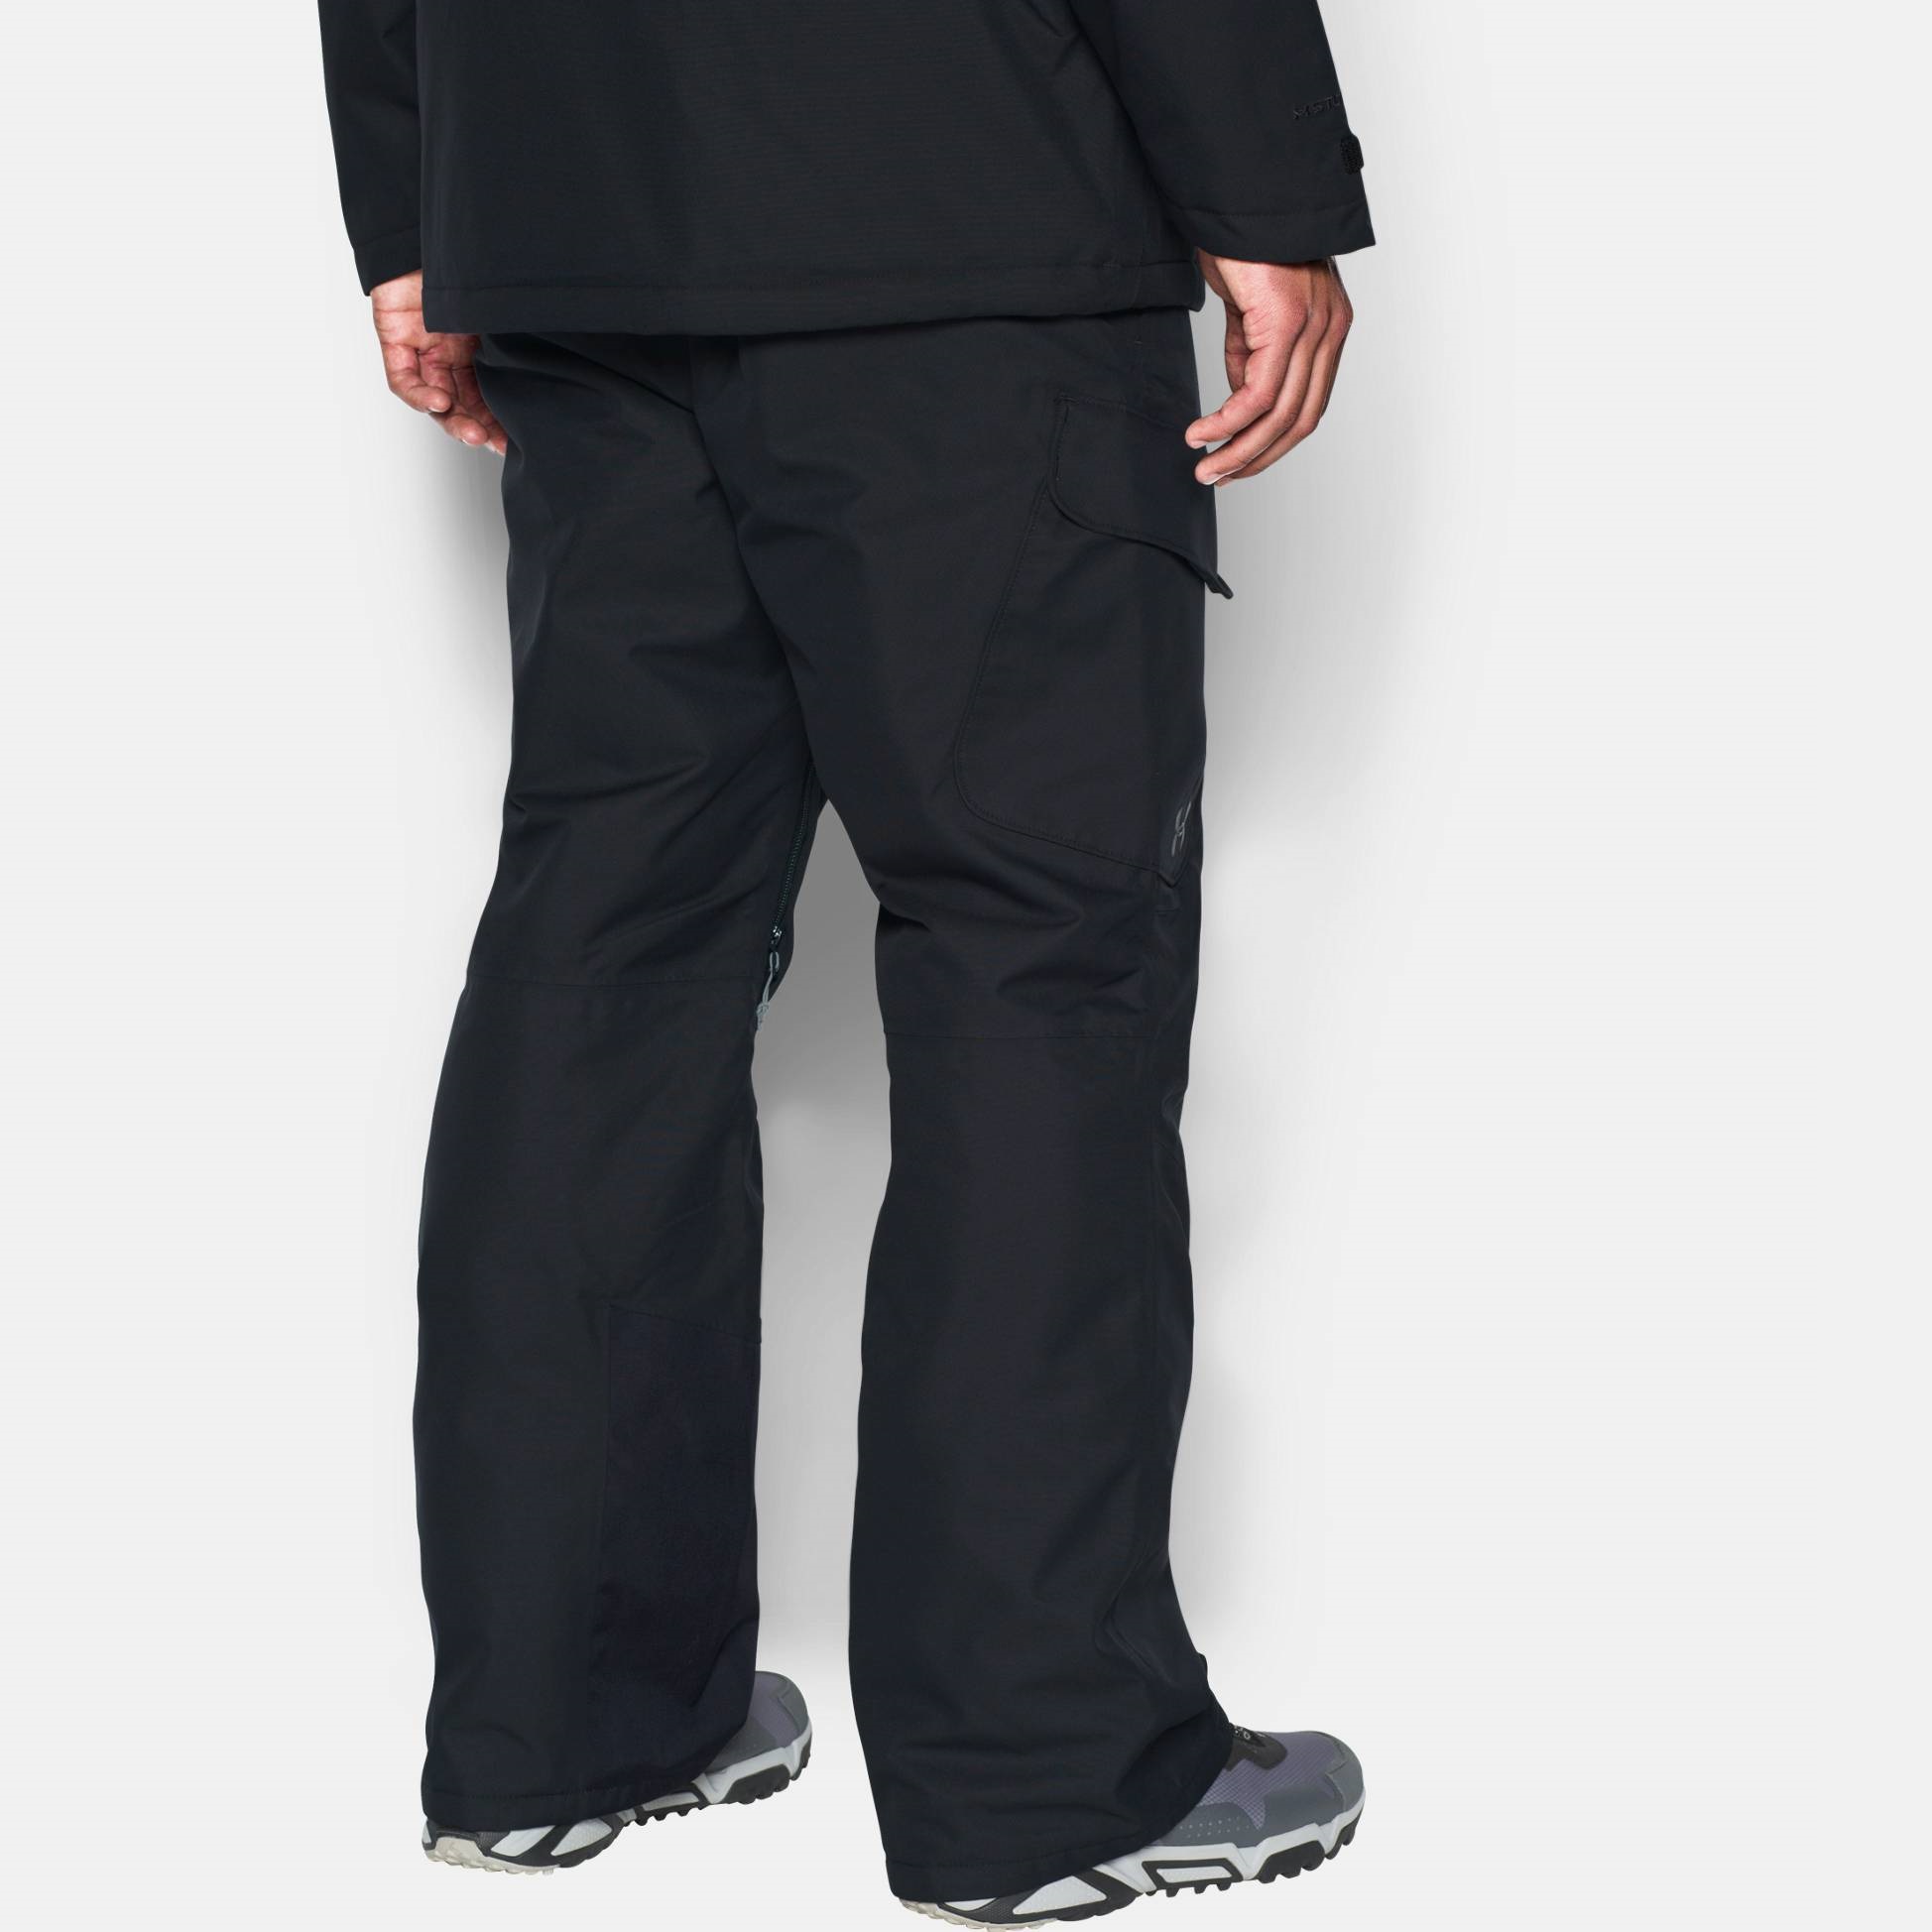 & Snow Pants | Under armour Storm Chutes Insulated Pants 0803 | gear